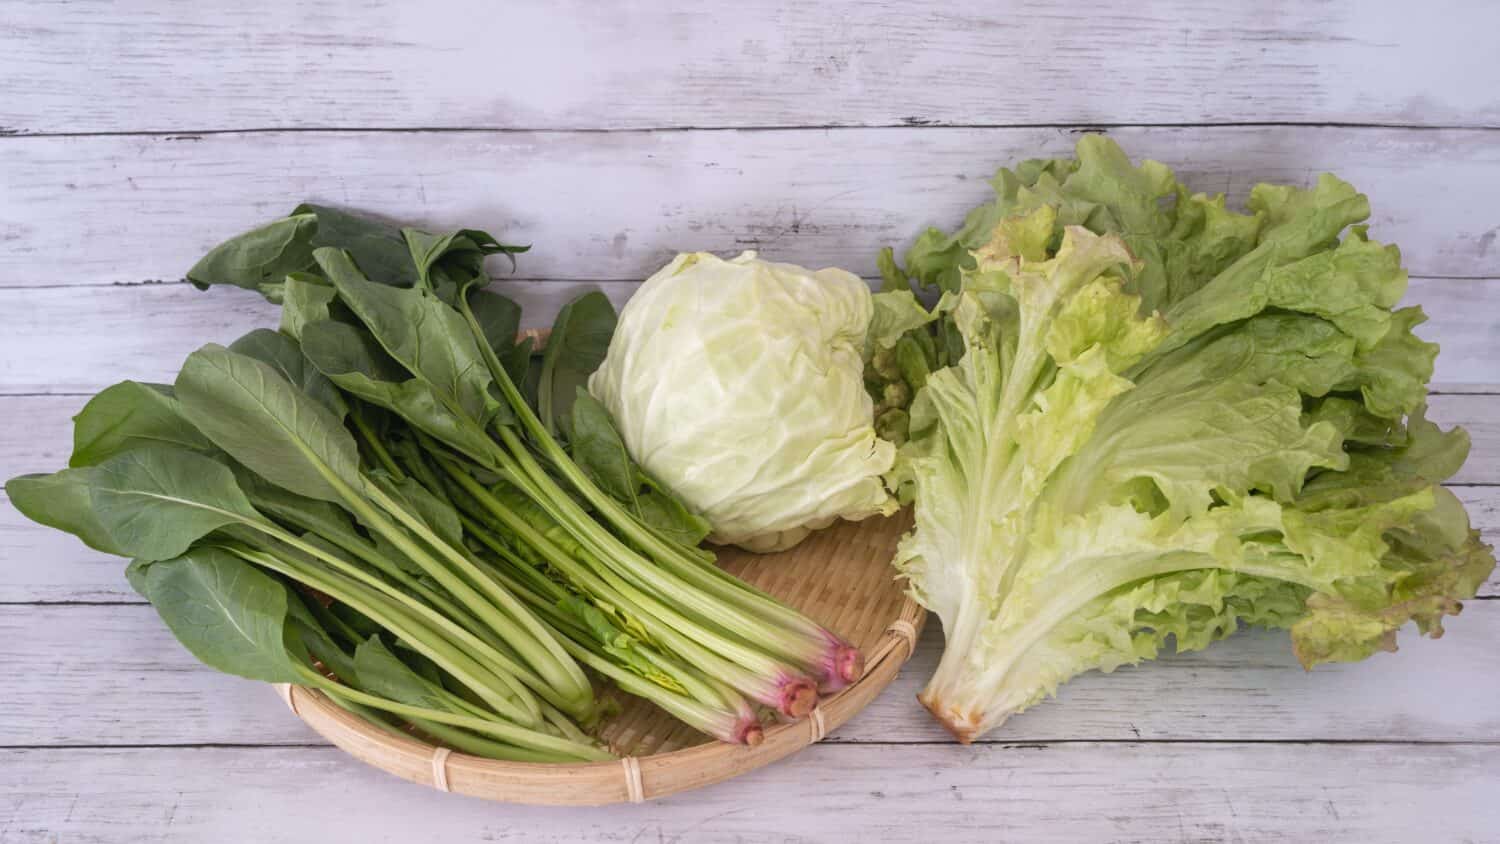 Green vegetables harvested in Japan.Cabbage, spinach, japanese mastered spinach and red leaf lettuce.